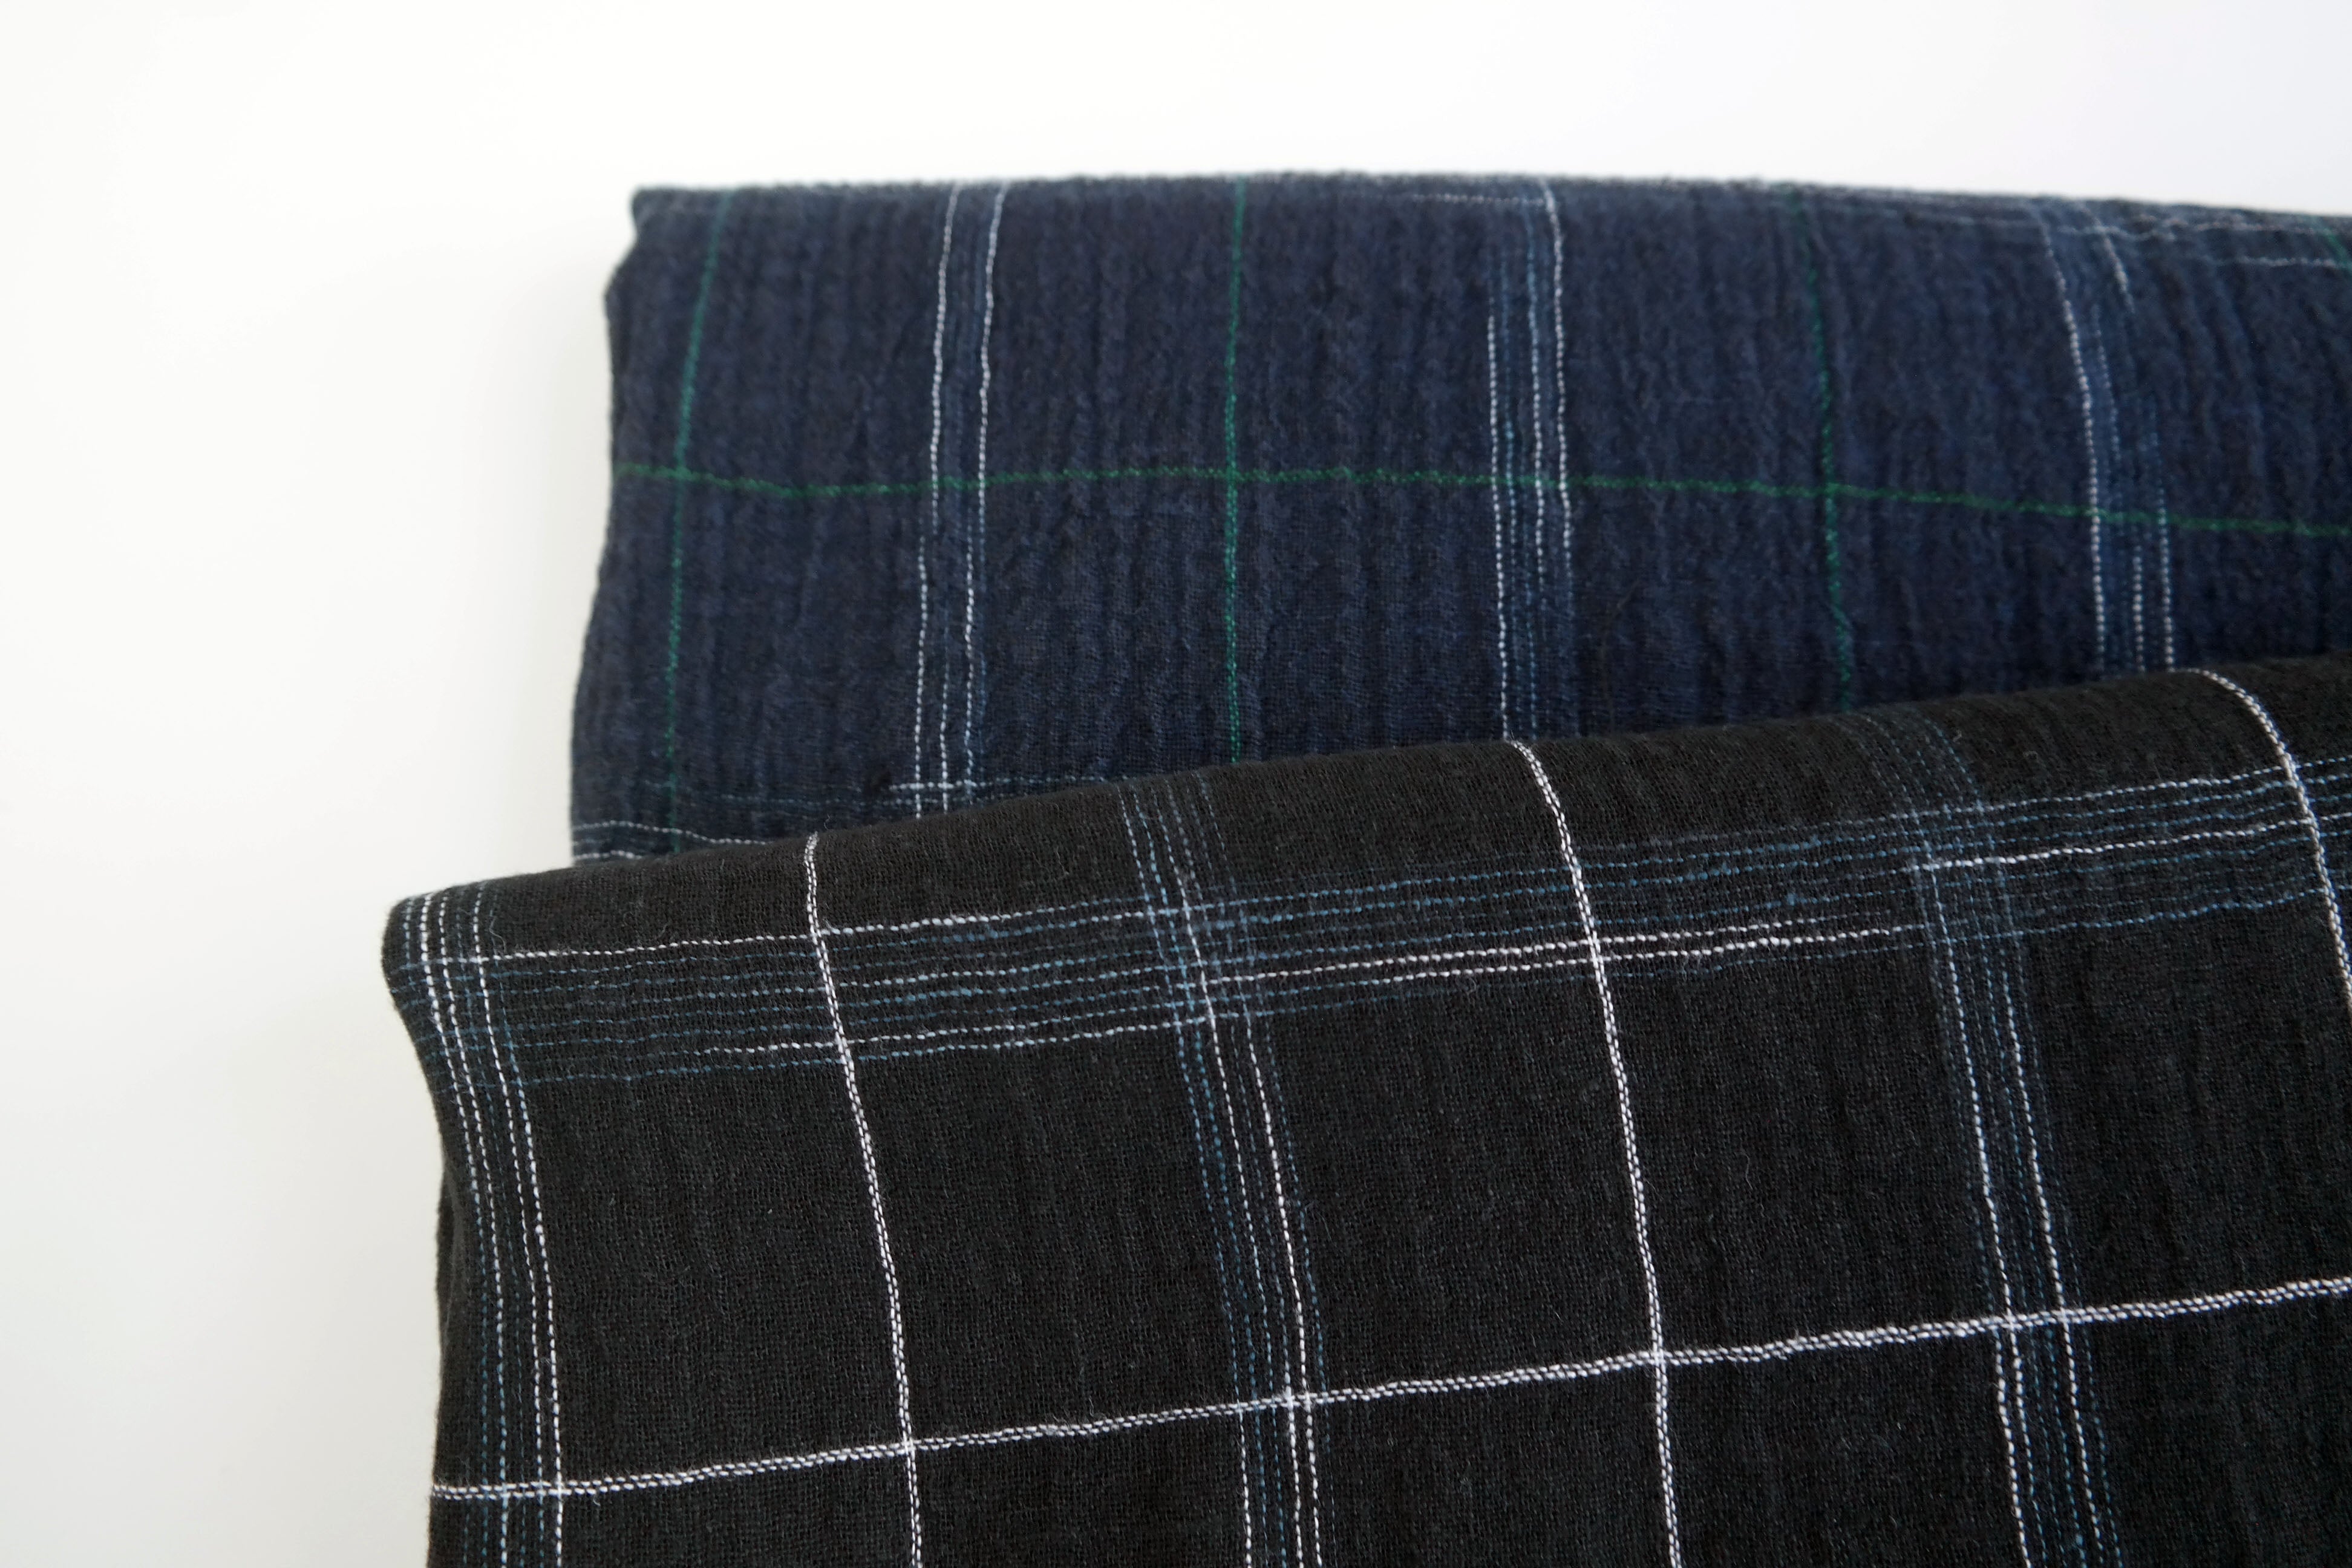 High Twisted Linen Fabric with Wrinkle Effect -Spaced Dyed Windowpane Check 6645 6688 - The Linen Lab - NAVY 6688